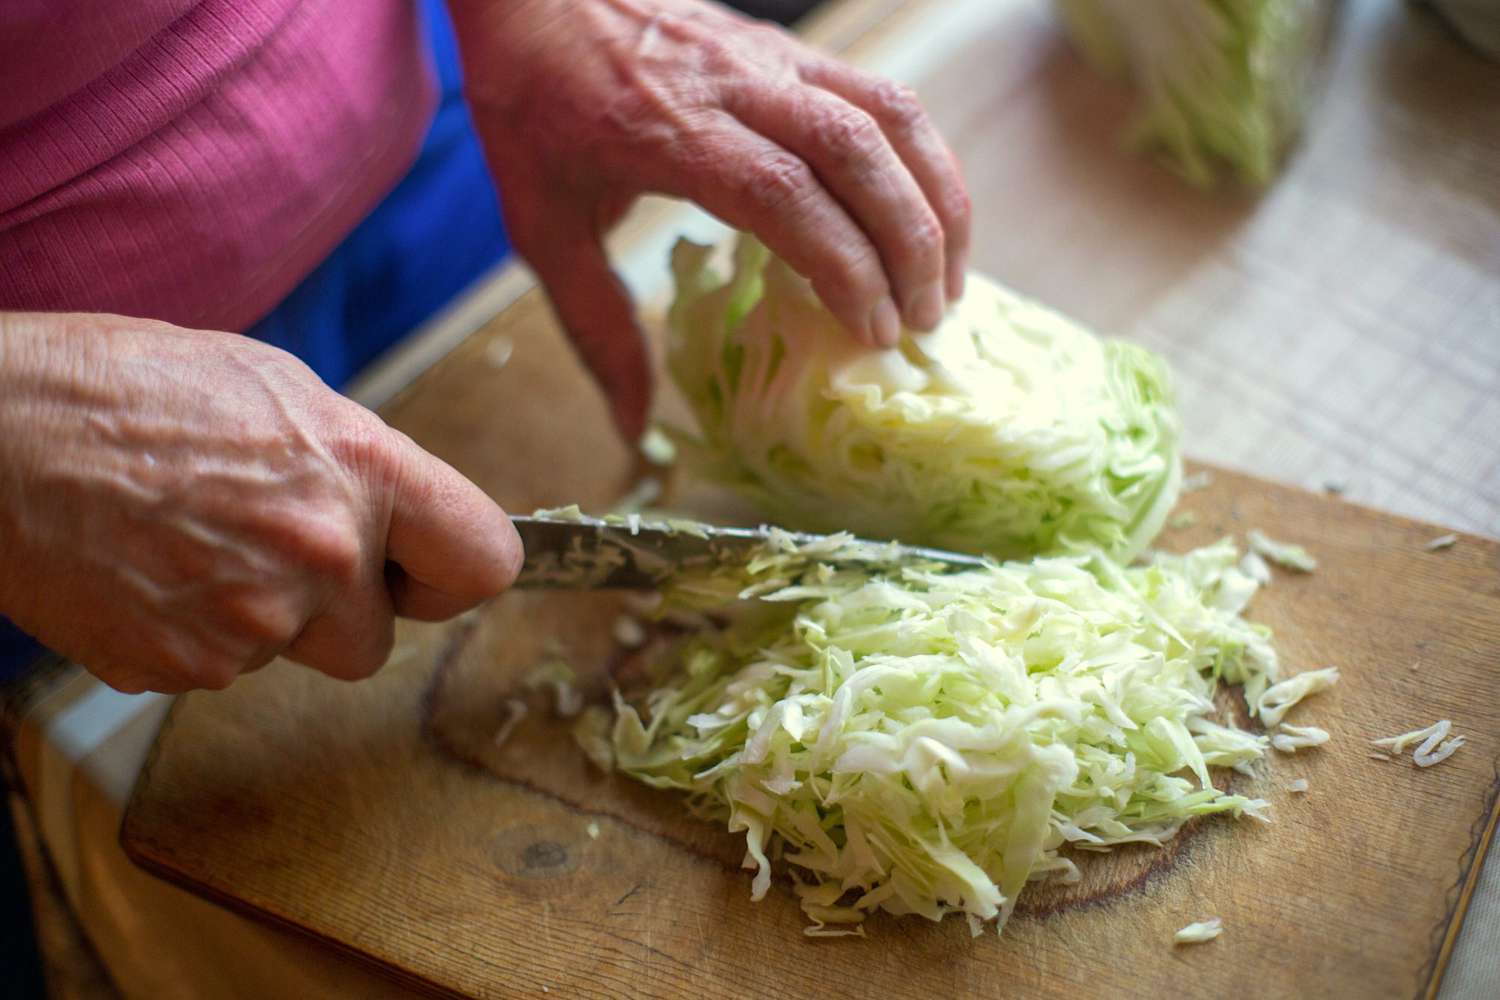 Female hands with a knife chop cabbage for cooking fresh salad